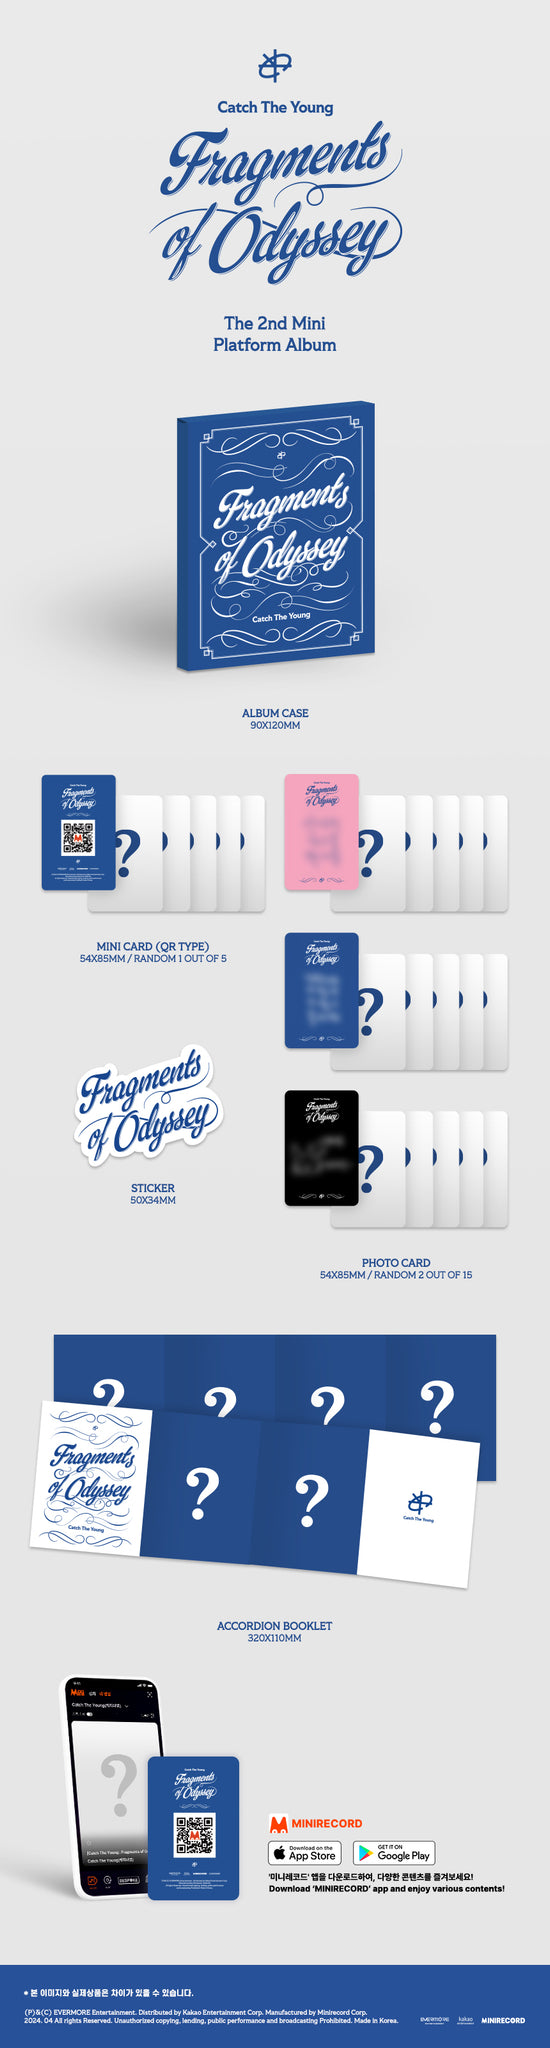 Catch The Young 2nd Mini Album Catch The Young : Fragments of Odyssey - Platform Version Inclusions: Album Case, Mini Card (QR Type), Photocards, Sticker, Accordion Booklet